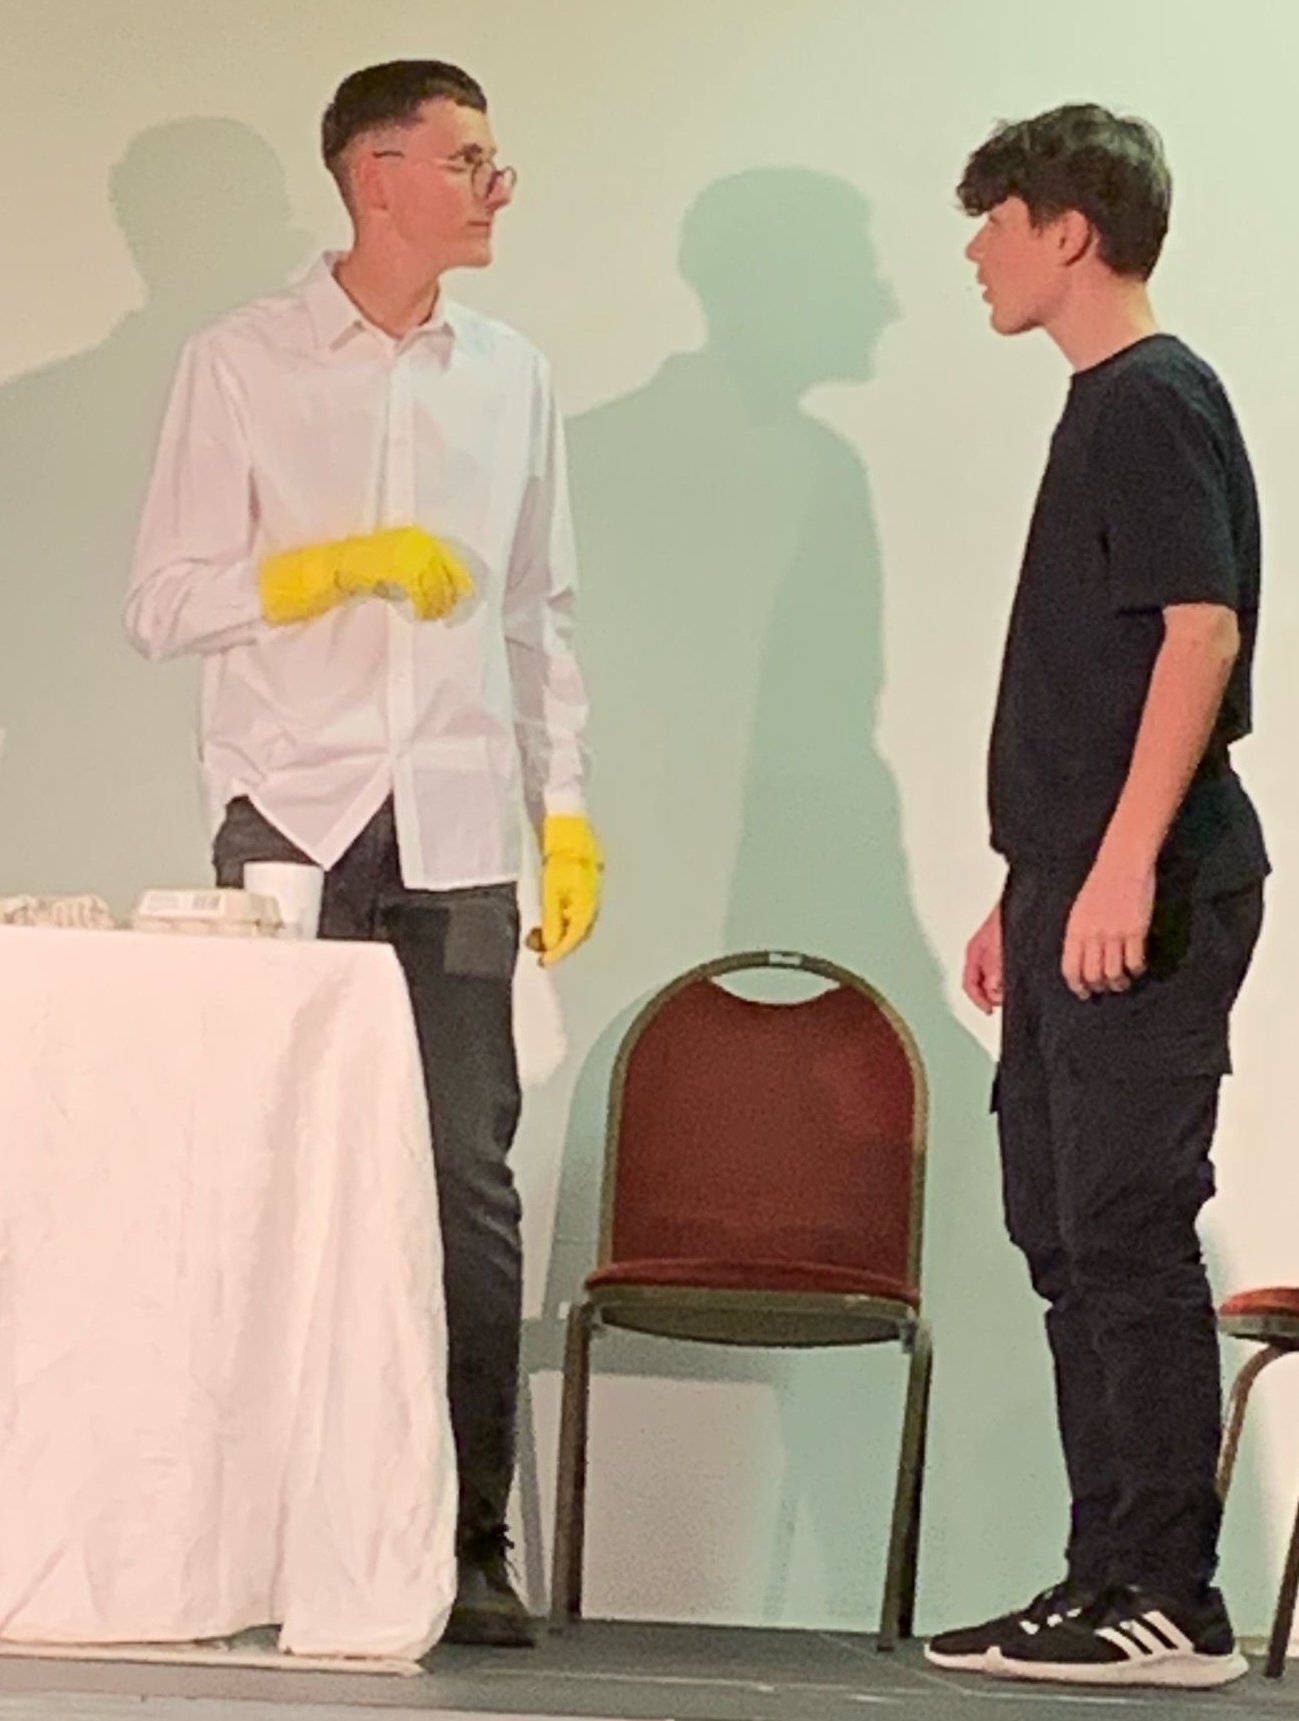 Parker (Jordan Burston) and Person (Arthur Grizzell) in the Defectives